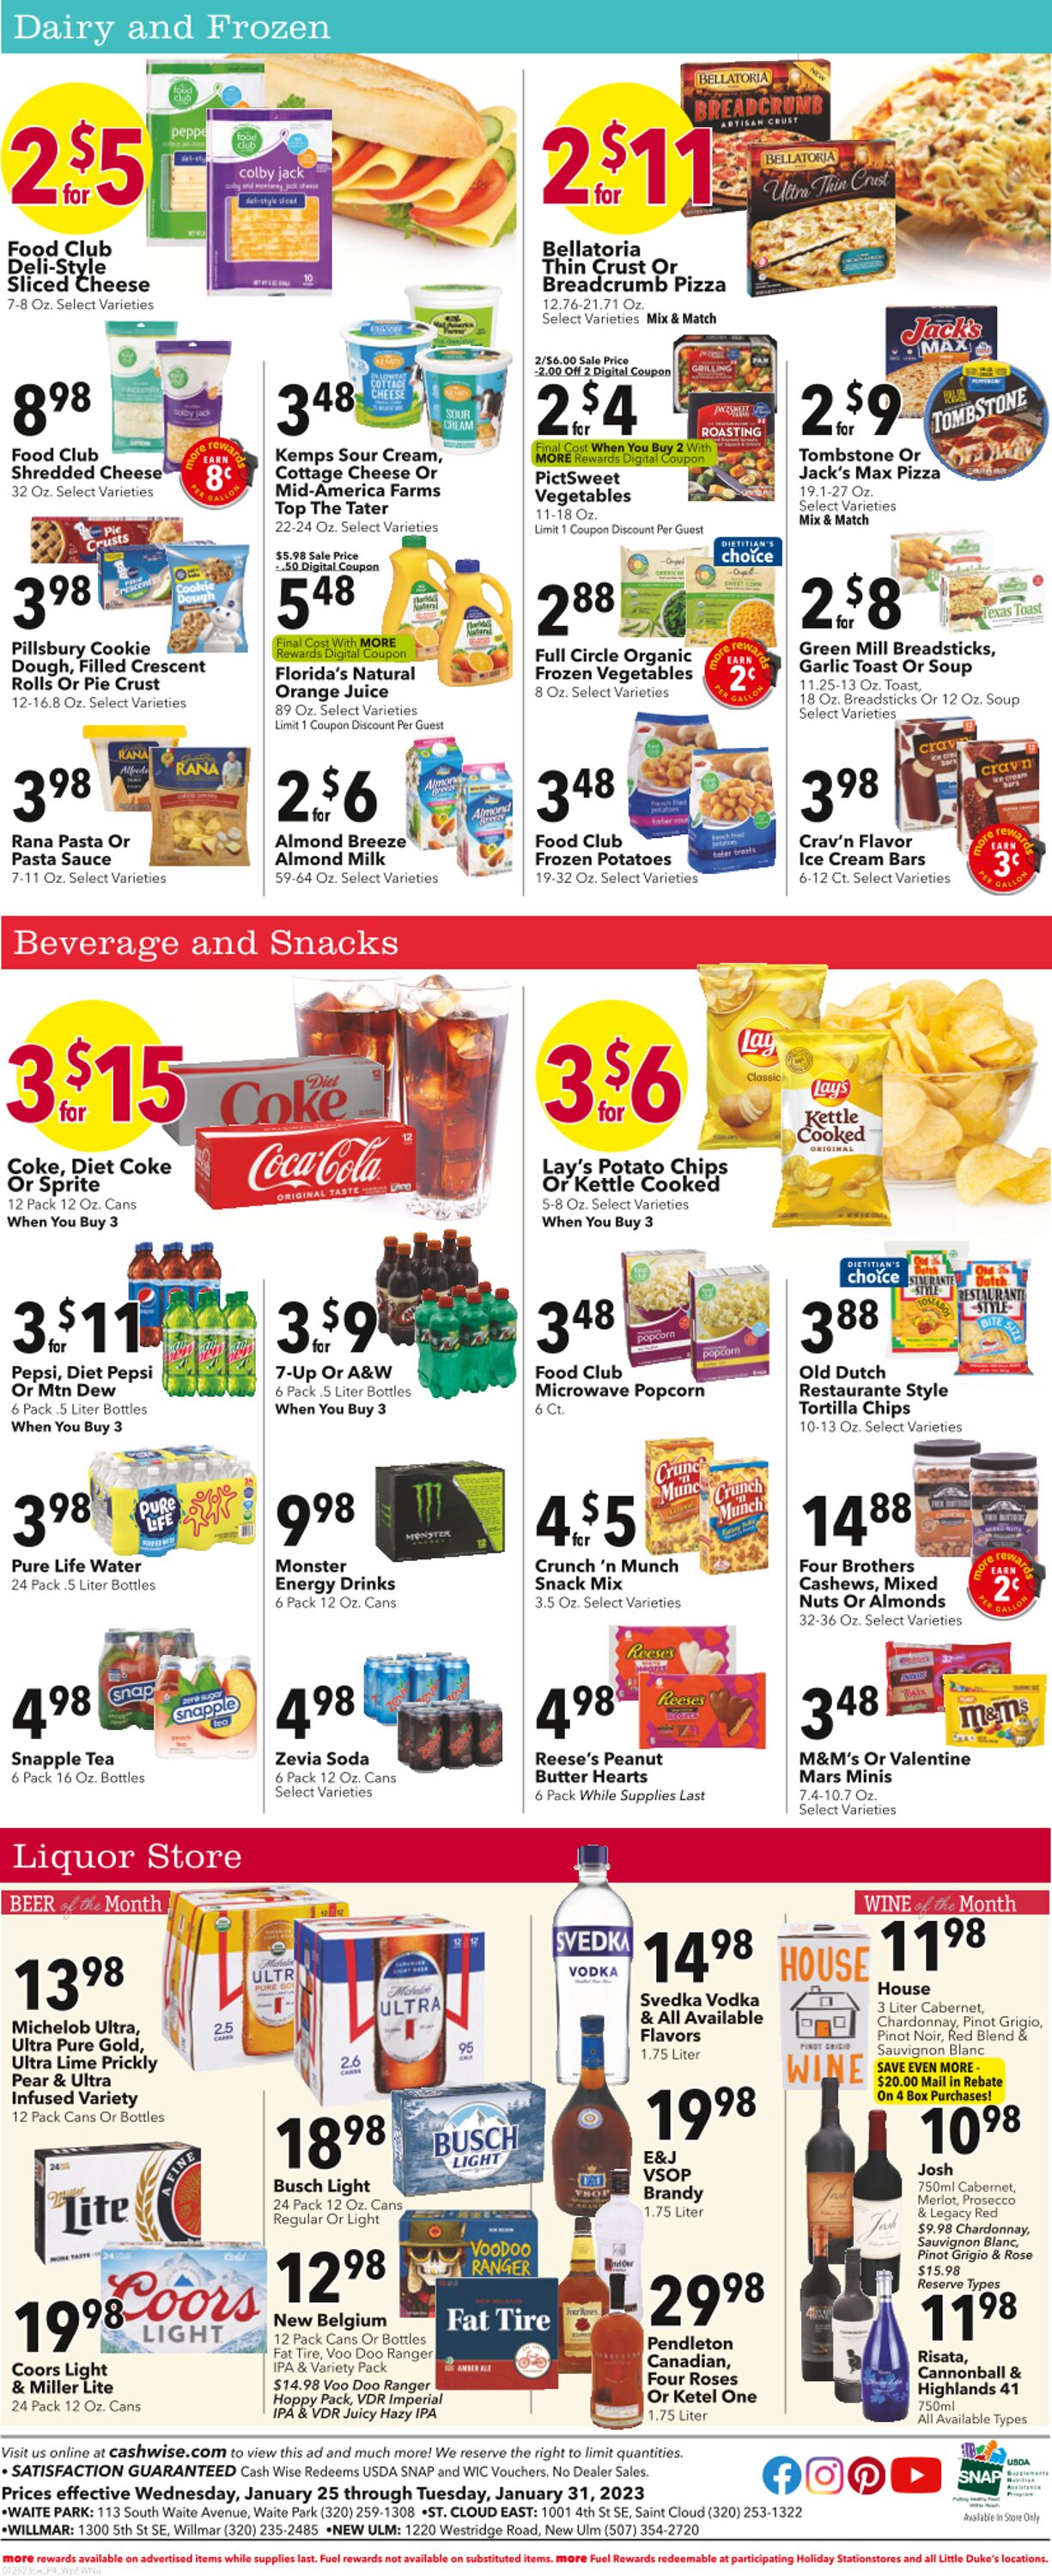 Cash Wise Weekly Ad Circular - valid 01/26-02/01/2023 (Page 4)